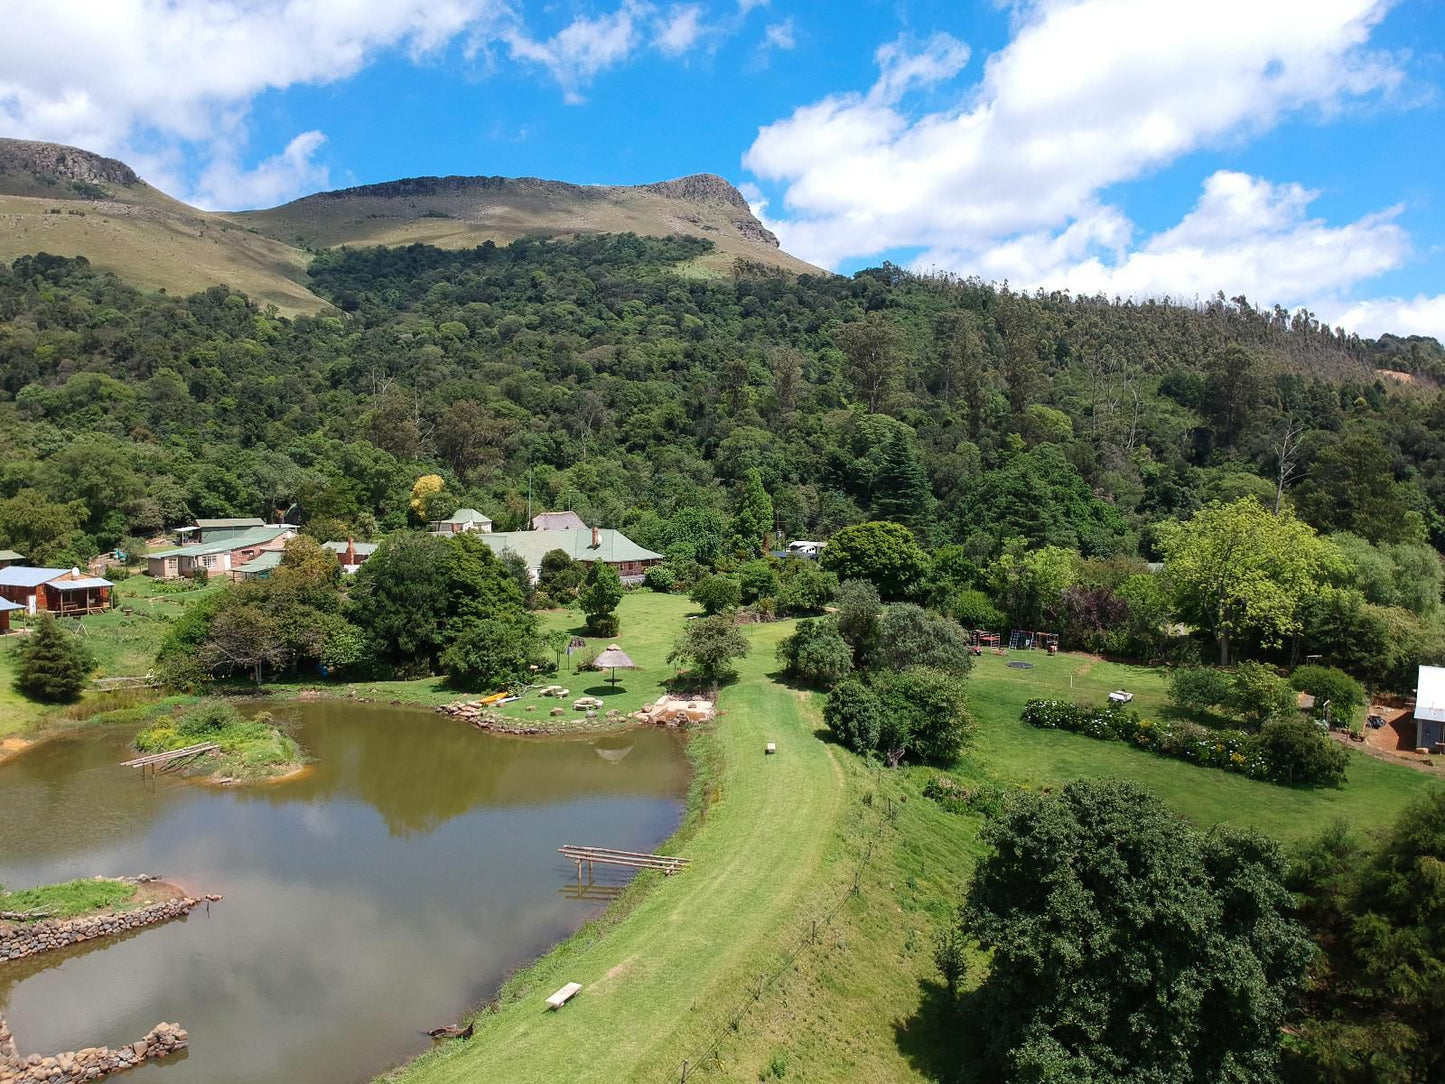 Mount Park Guest Farm Dargle Howick Kwazulu Natal South Africa Complementary Colors, Mountain, Nature, River, Waters, Highland